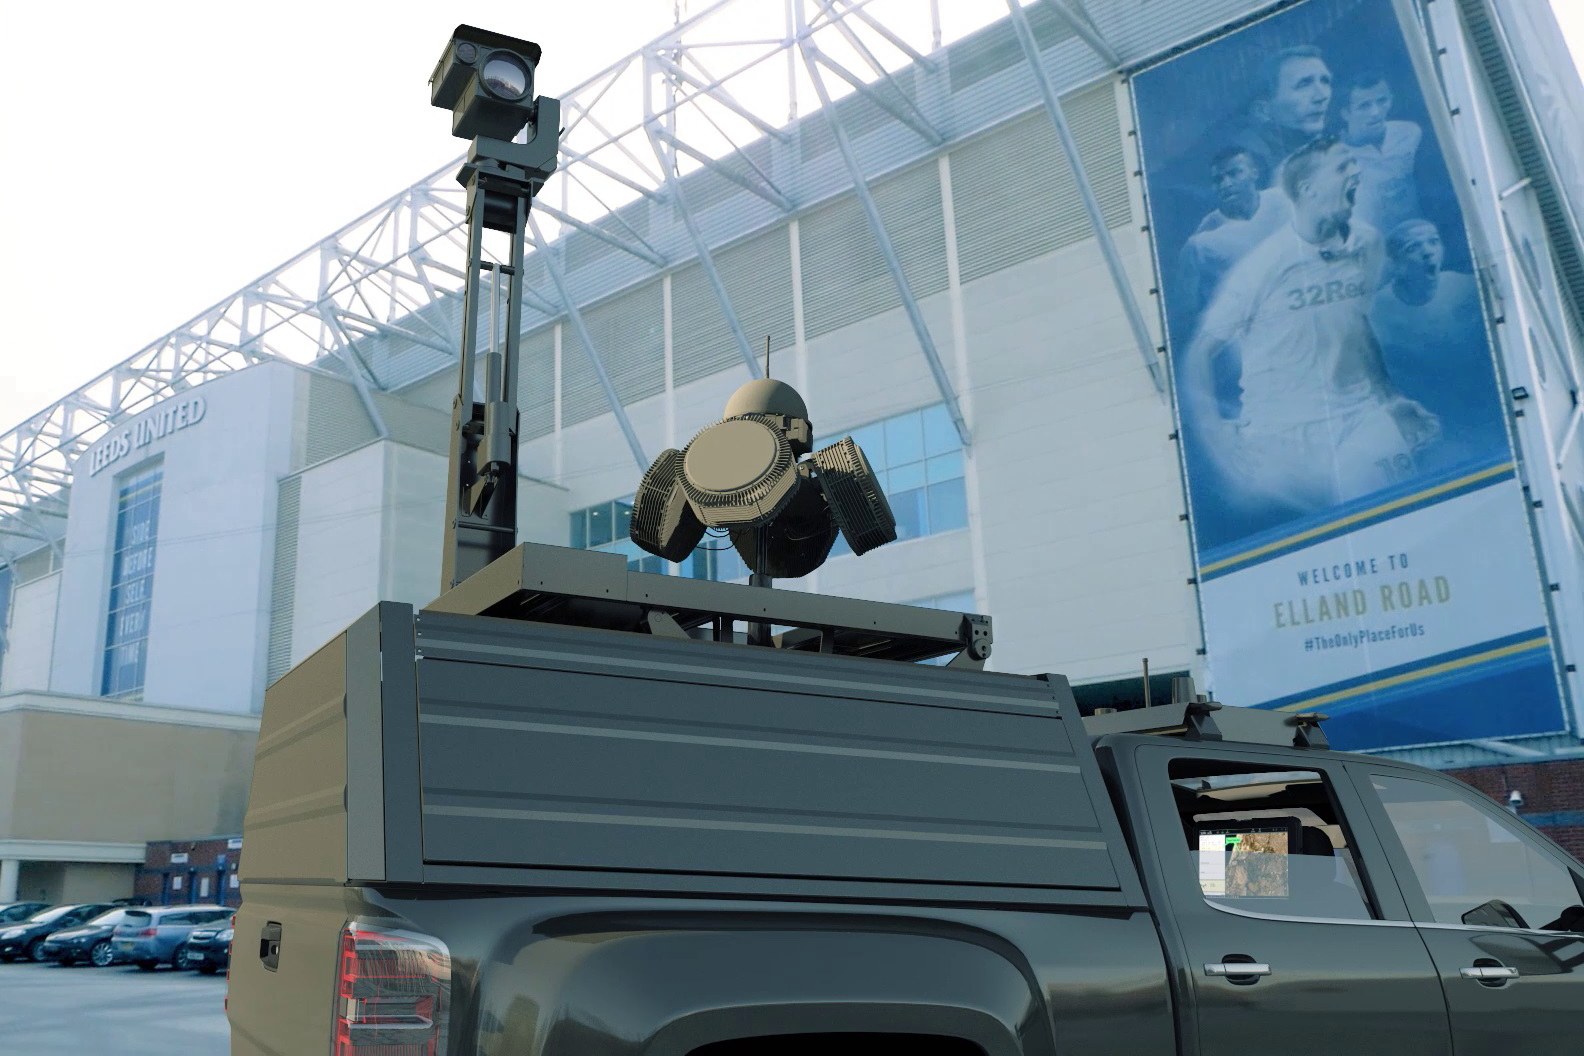 Elbit Systems' ReDrone vehicular tactical system at Elland Road, home to Leeds United. Click to enlarge.